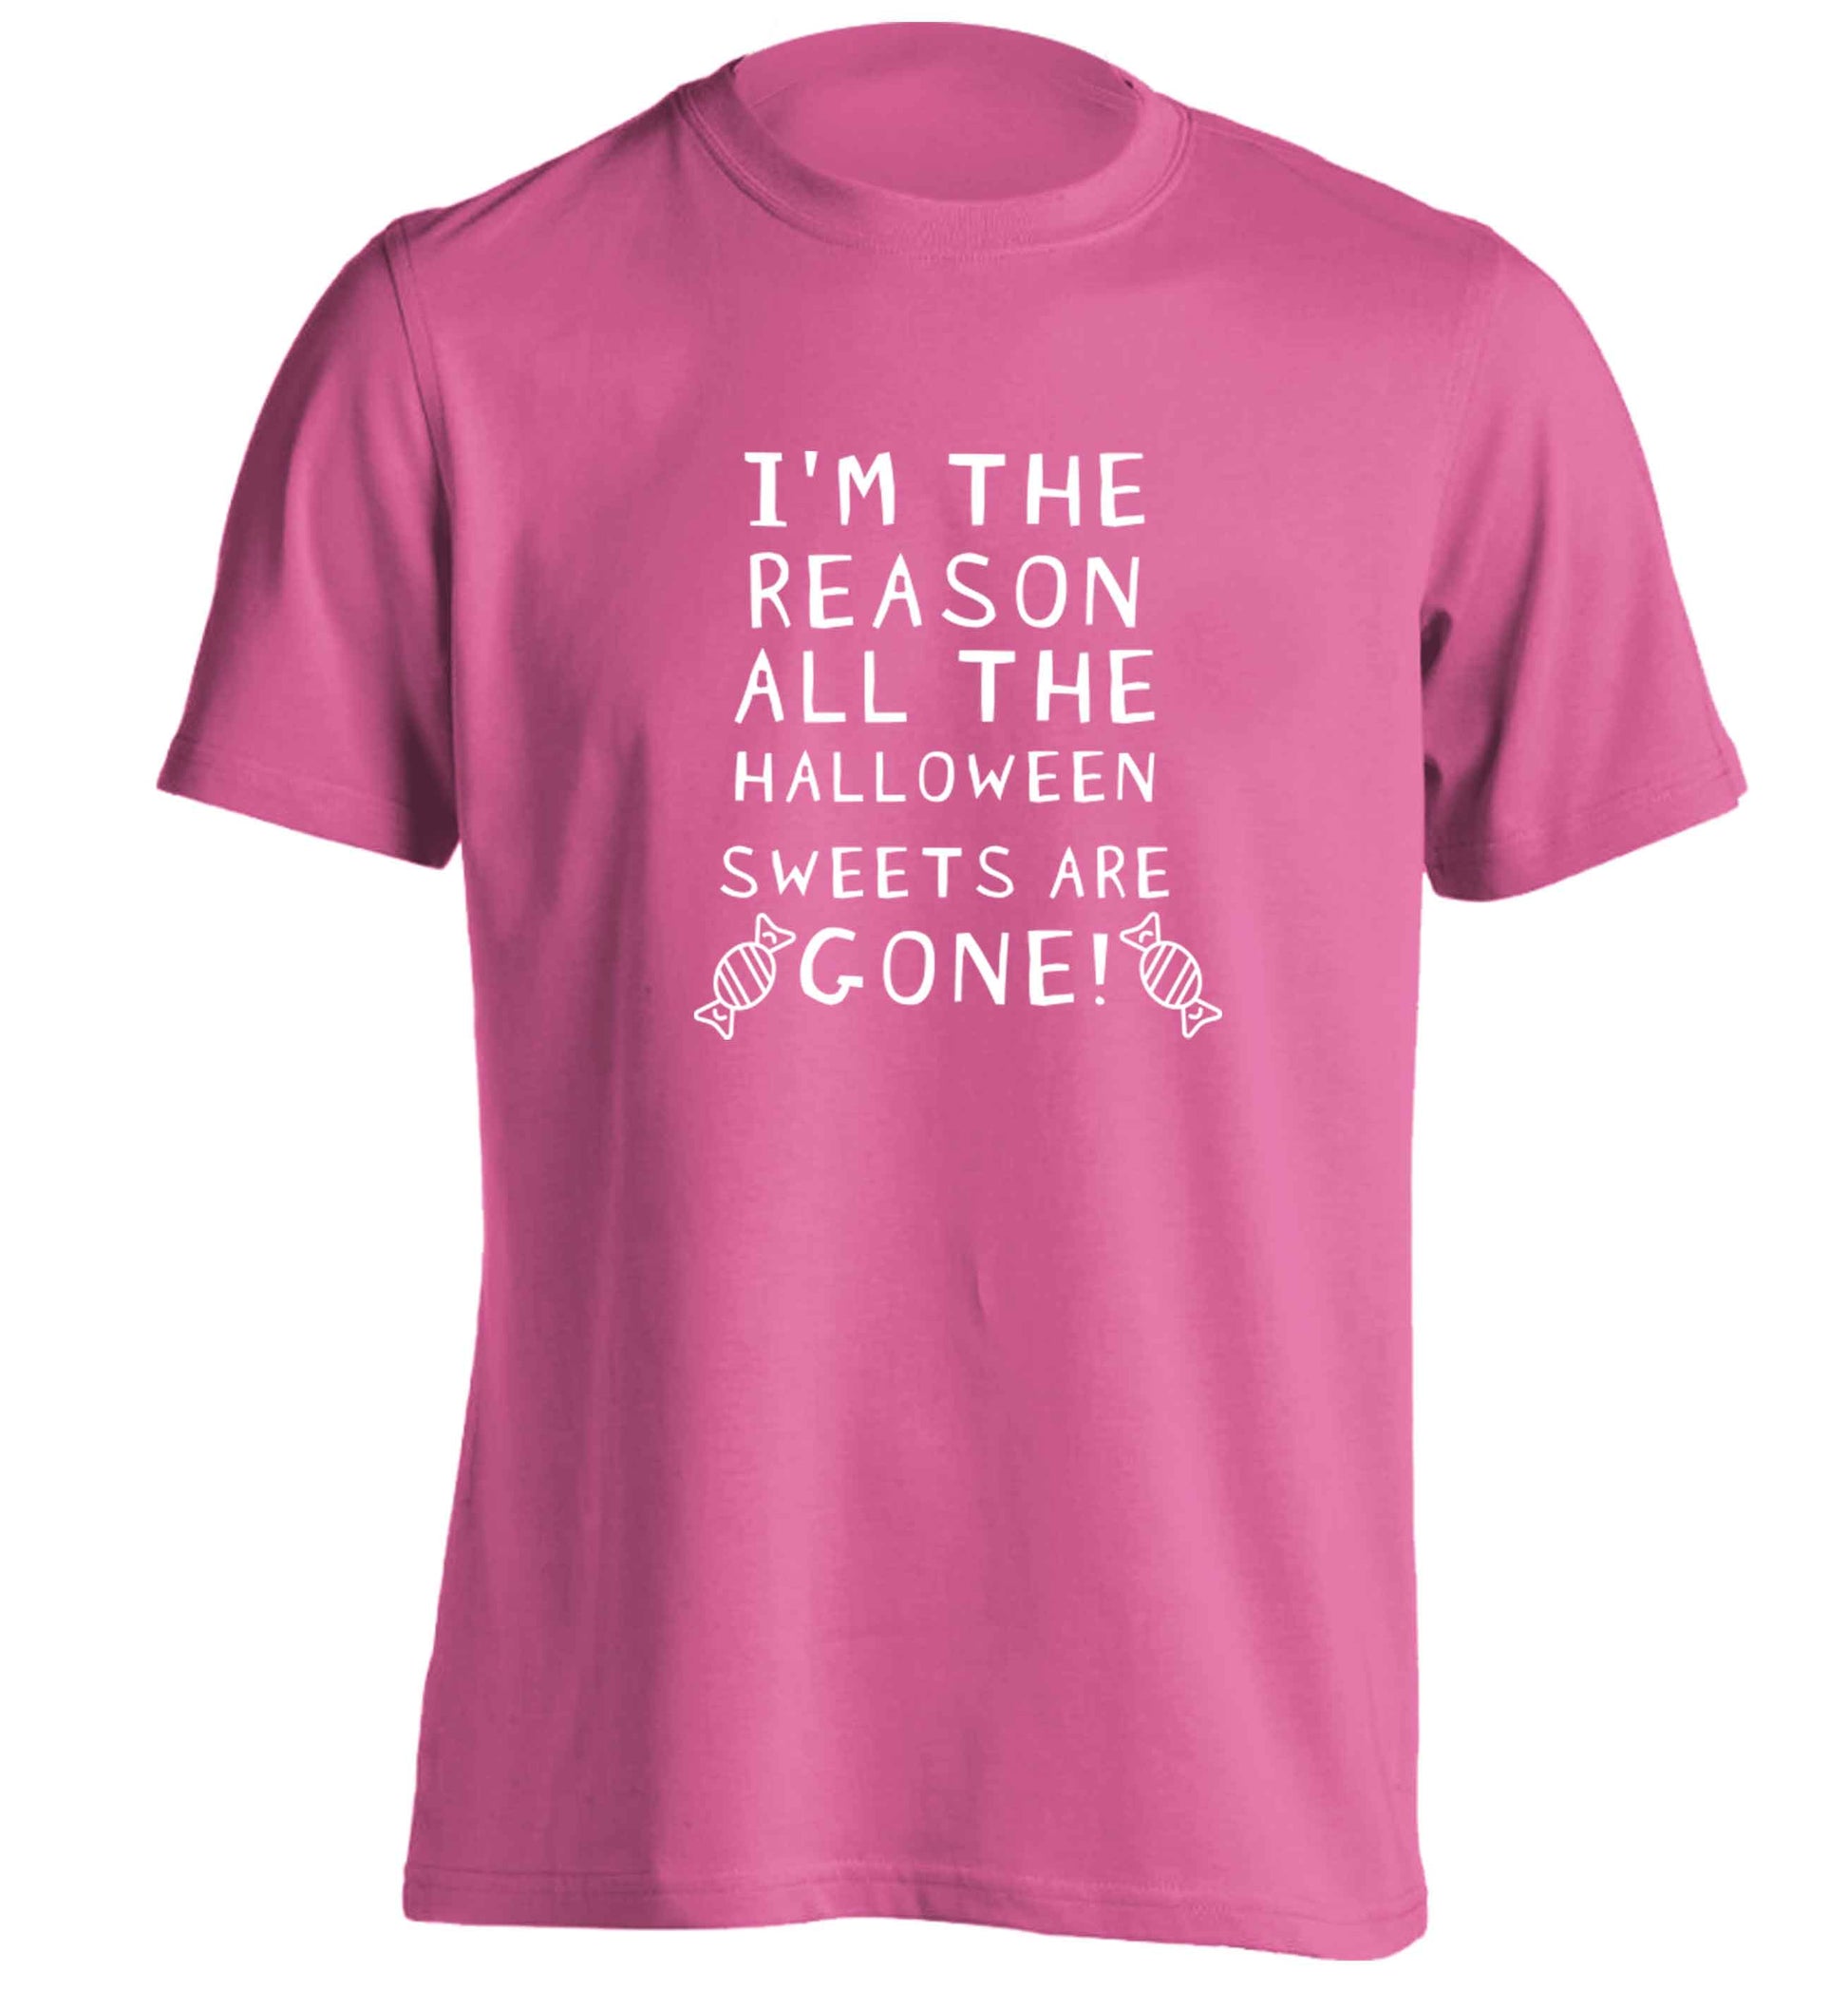 I'm the reason all of the halloween sweets are gone adults unisex pink Tshirt 2XL